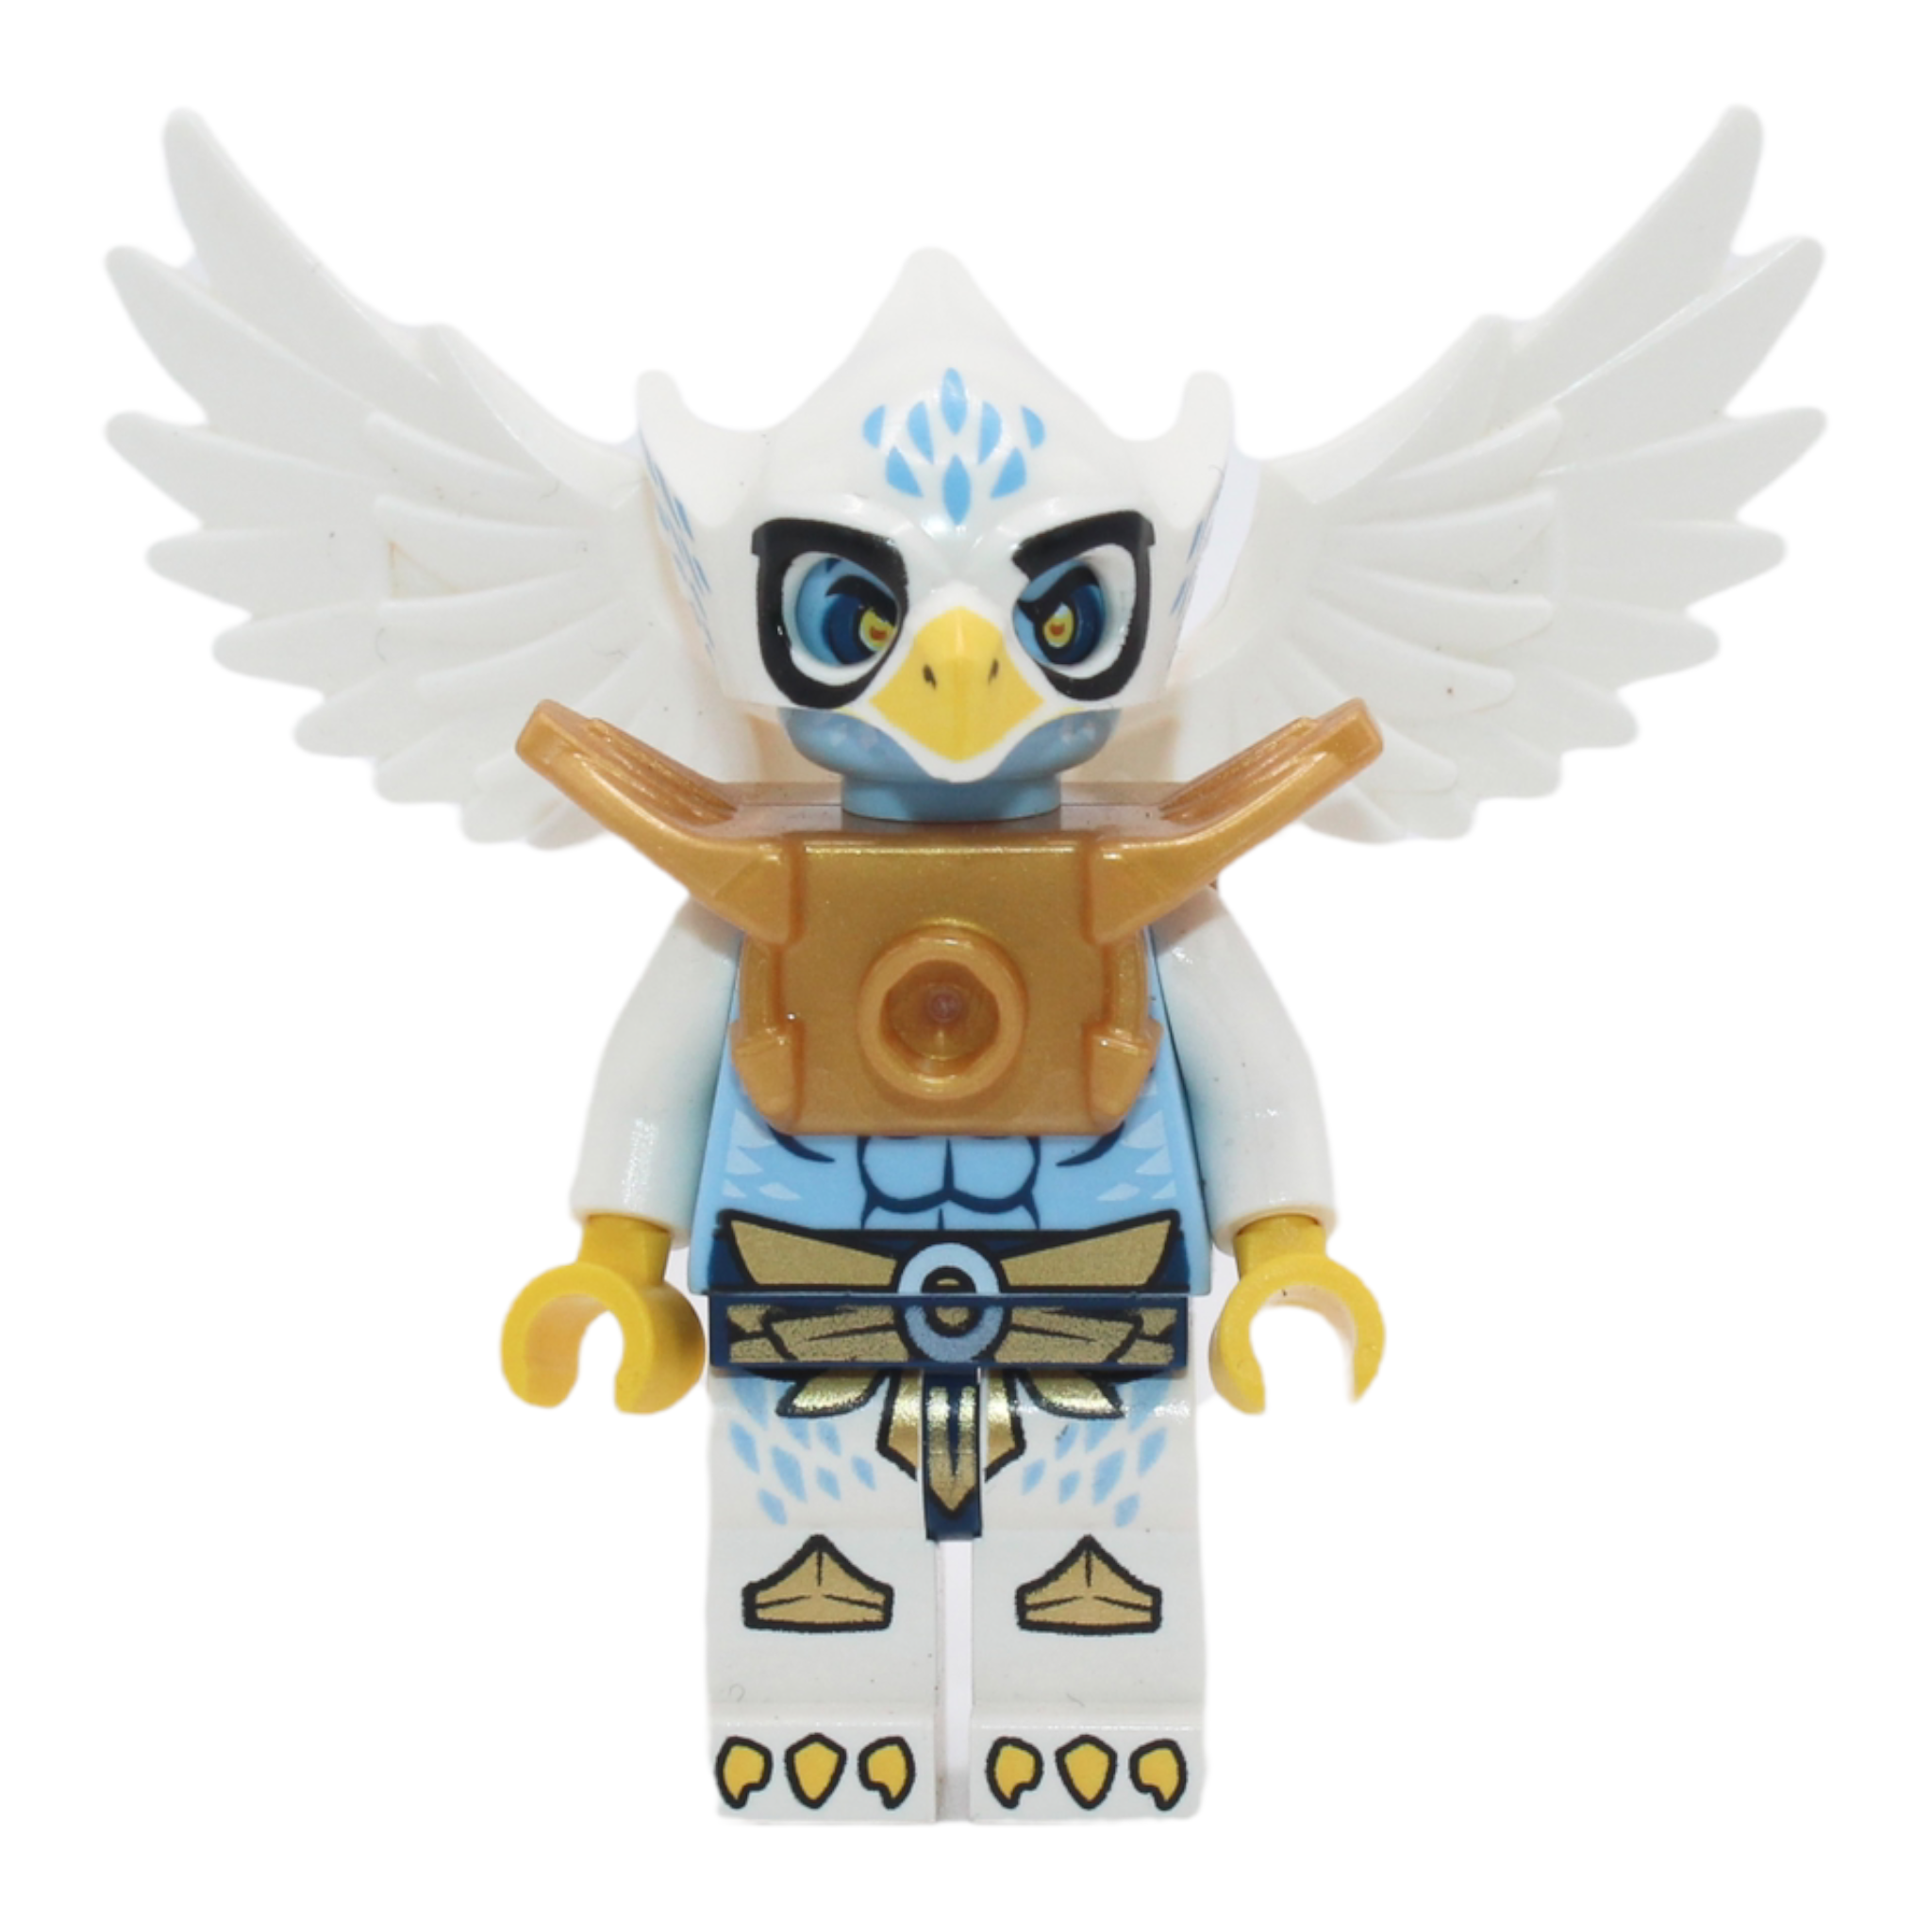 Equila (pearl gold armor, wings)